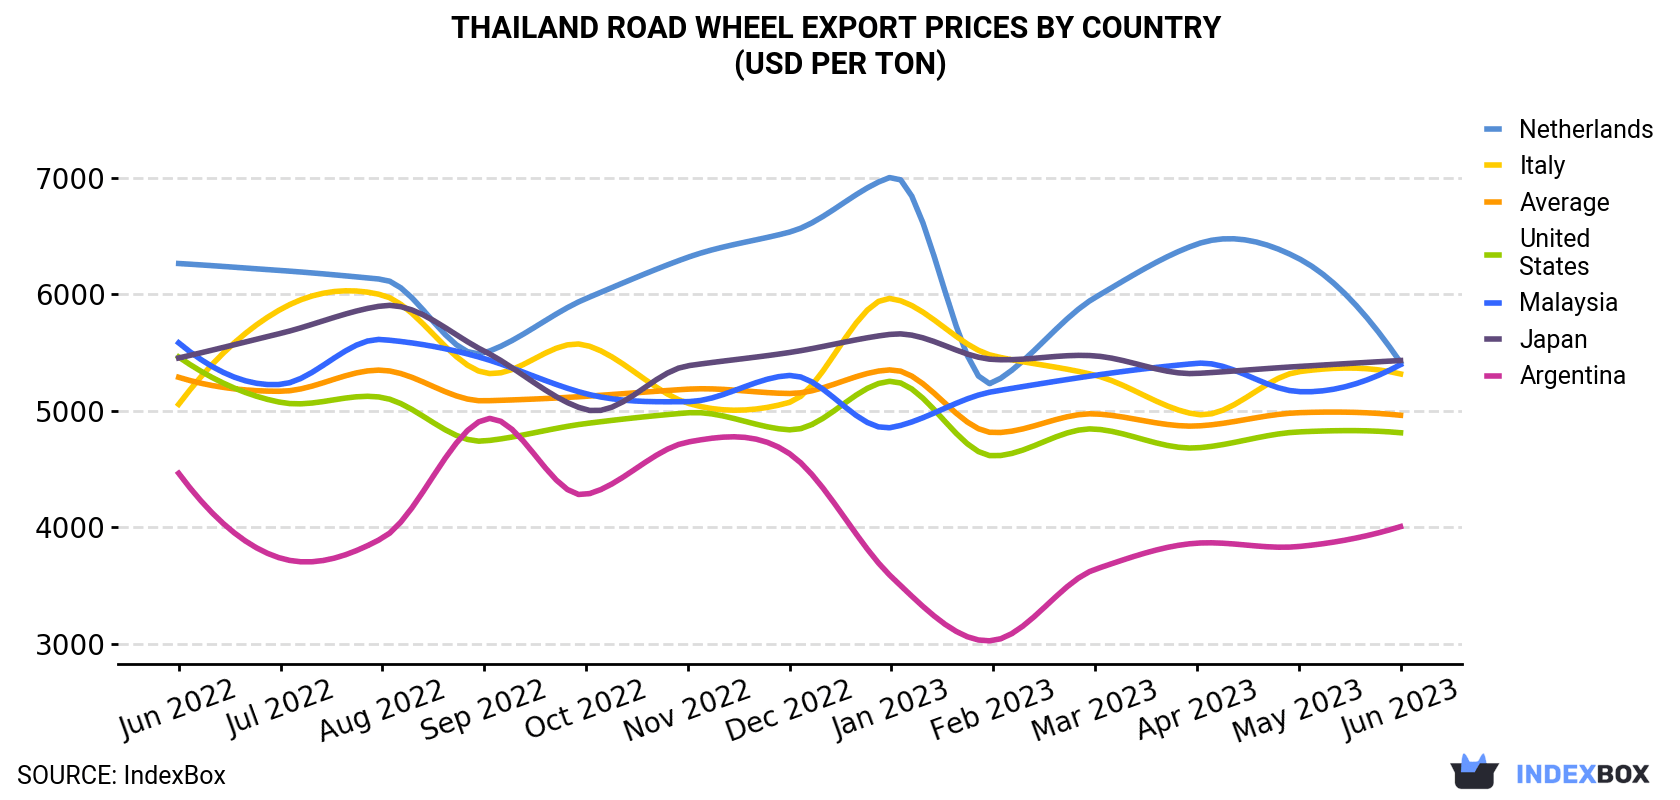 Thailand Road Wheel Export Prices By Country (USD Per Ton)